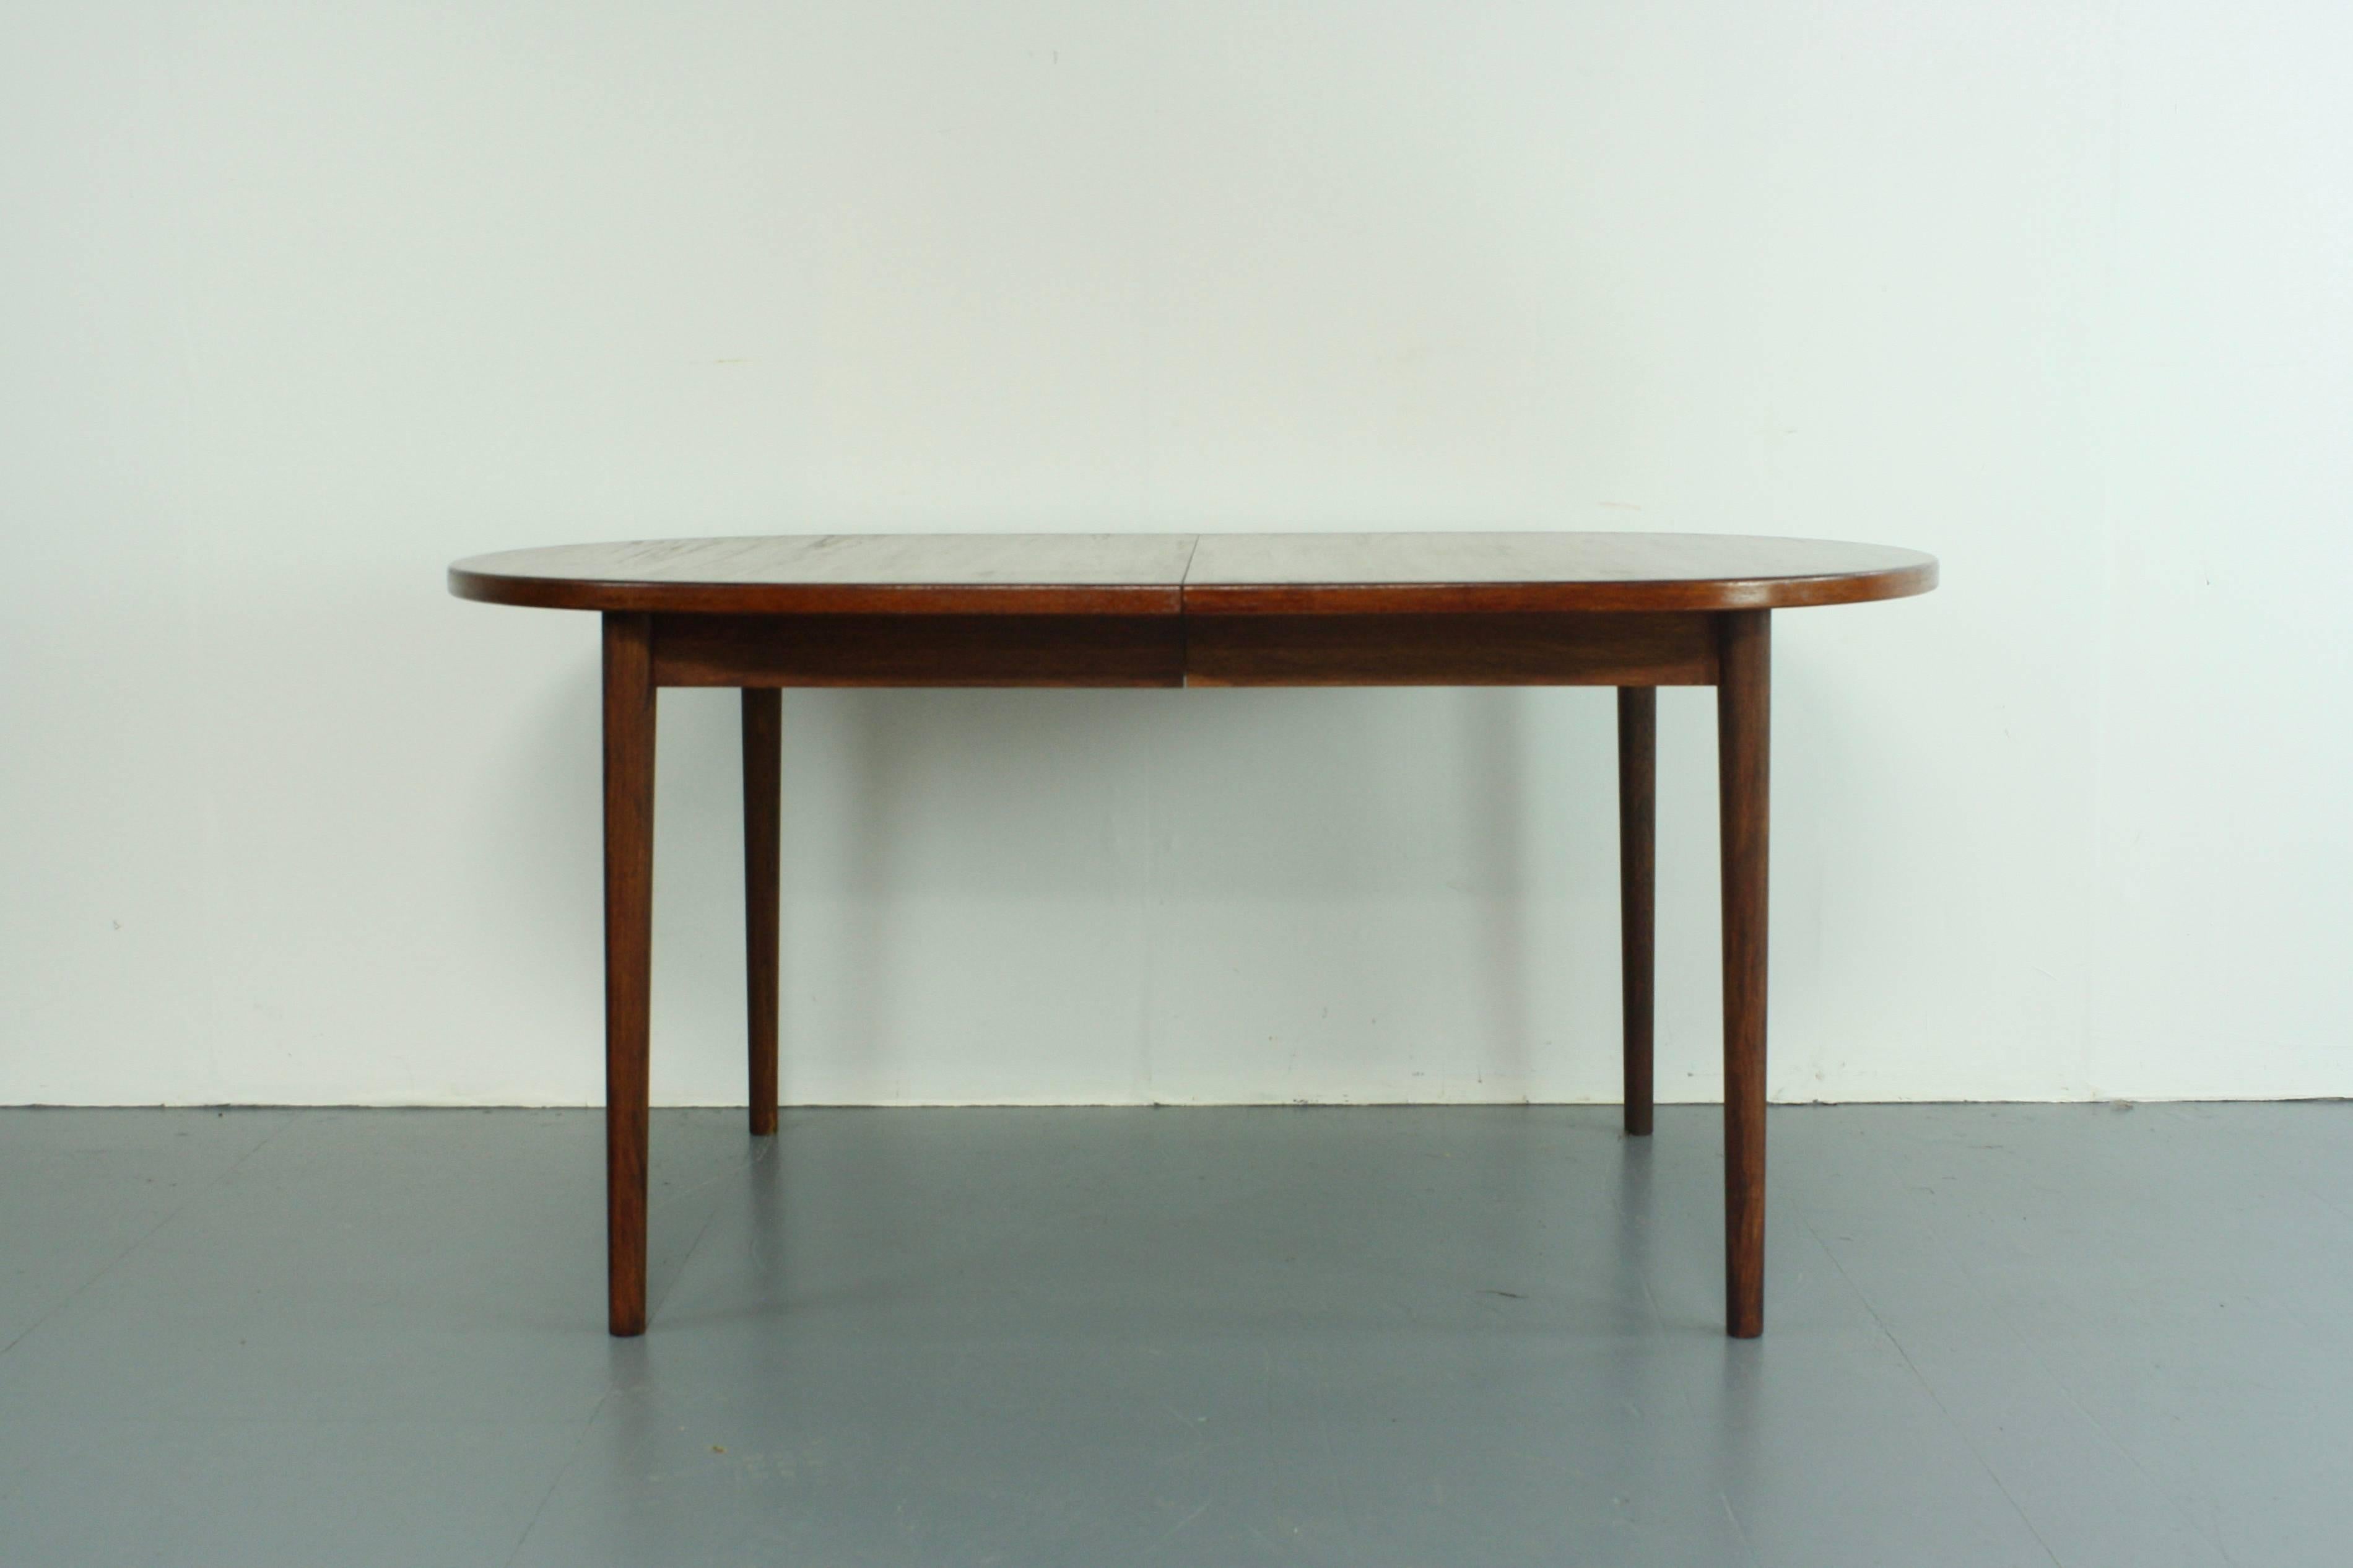 20th Century Midcentury Extending Teak Dining Table by Nils Jonsson for Troeds of Sweden